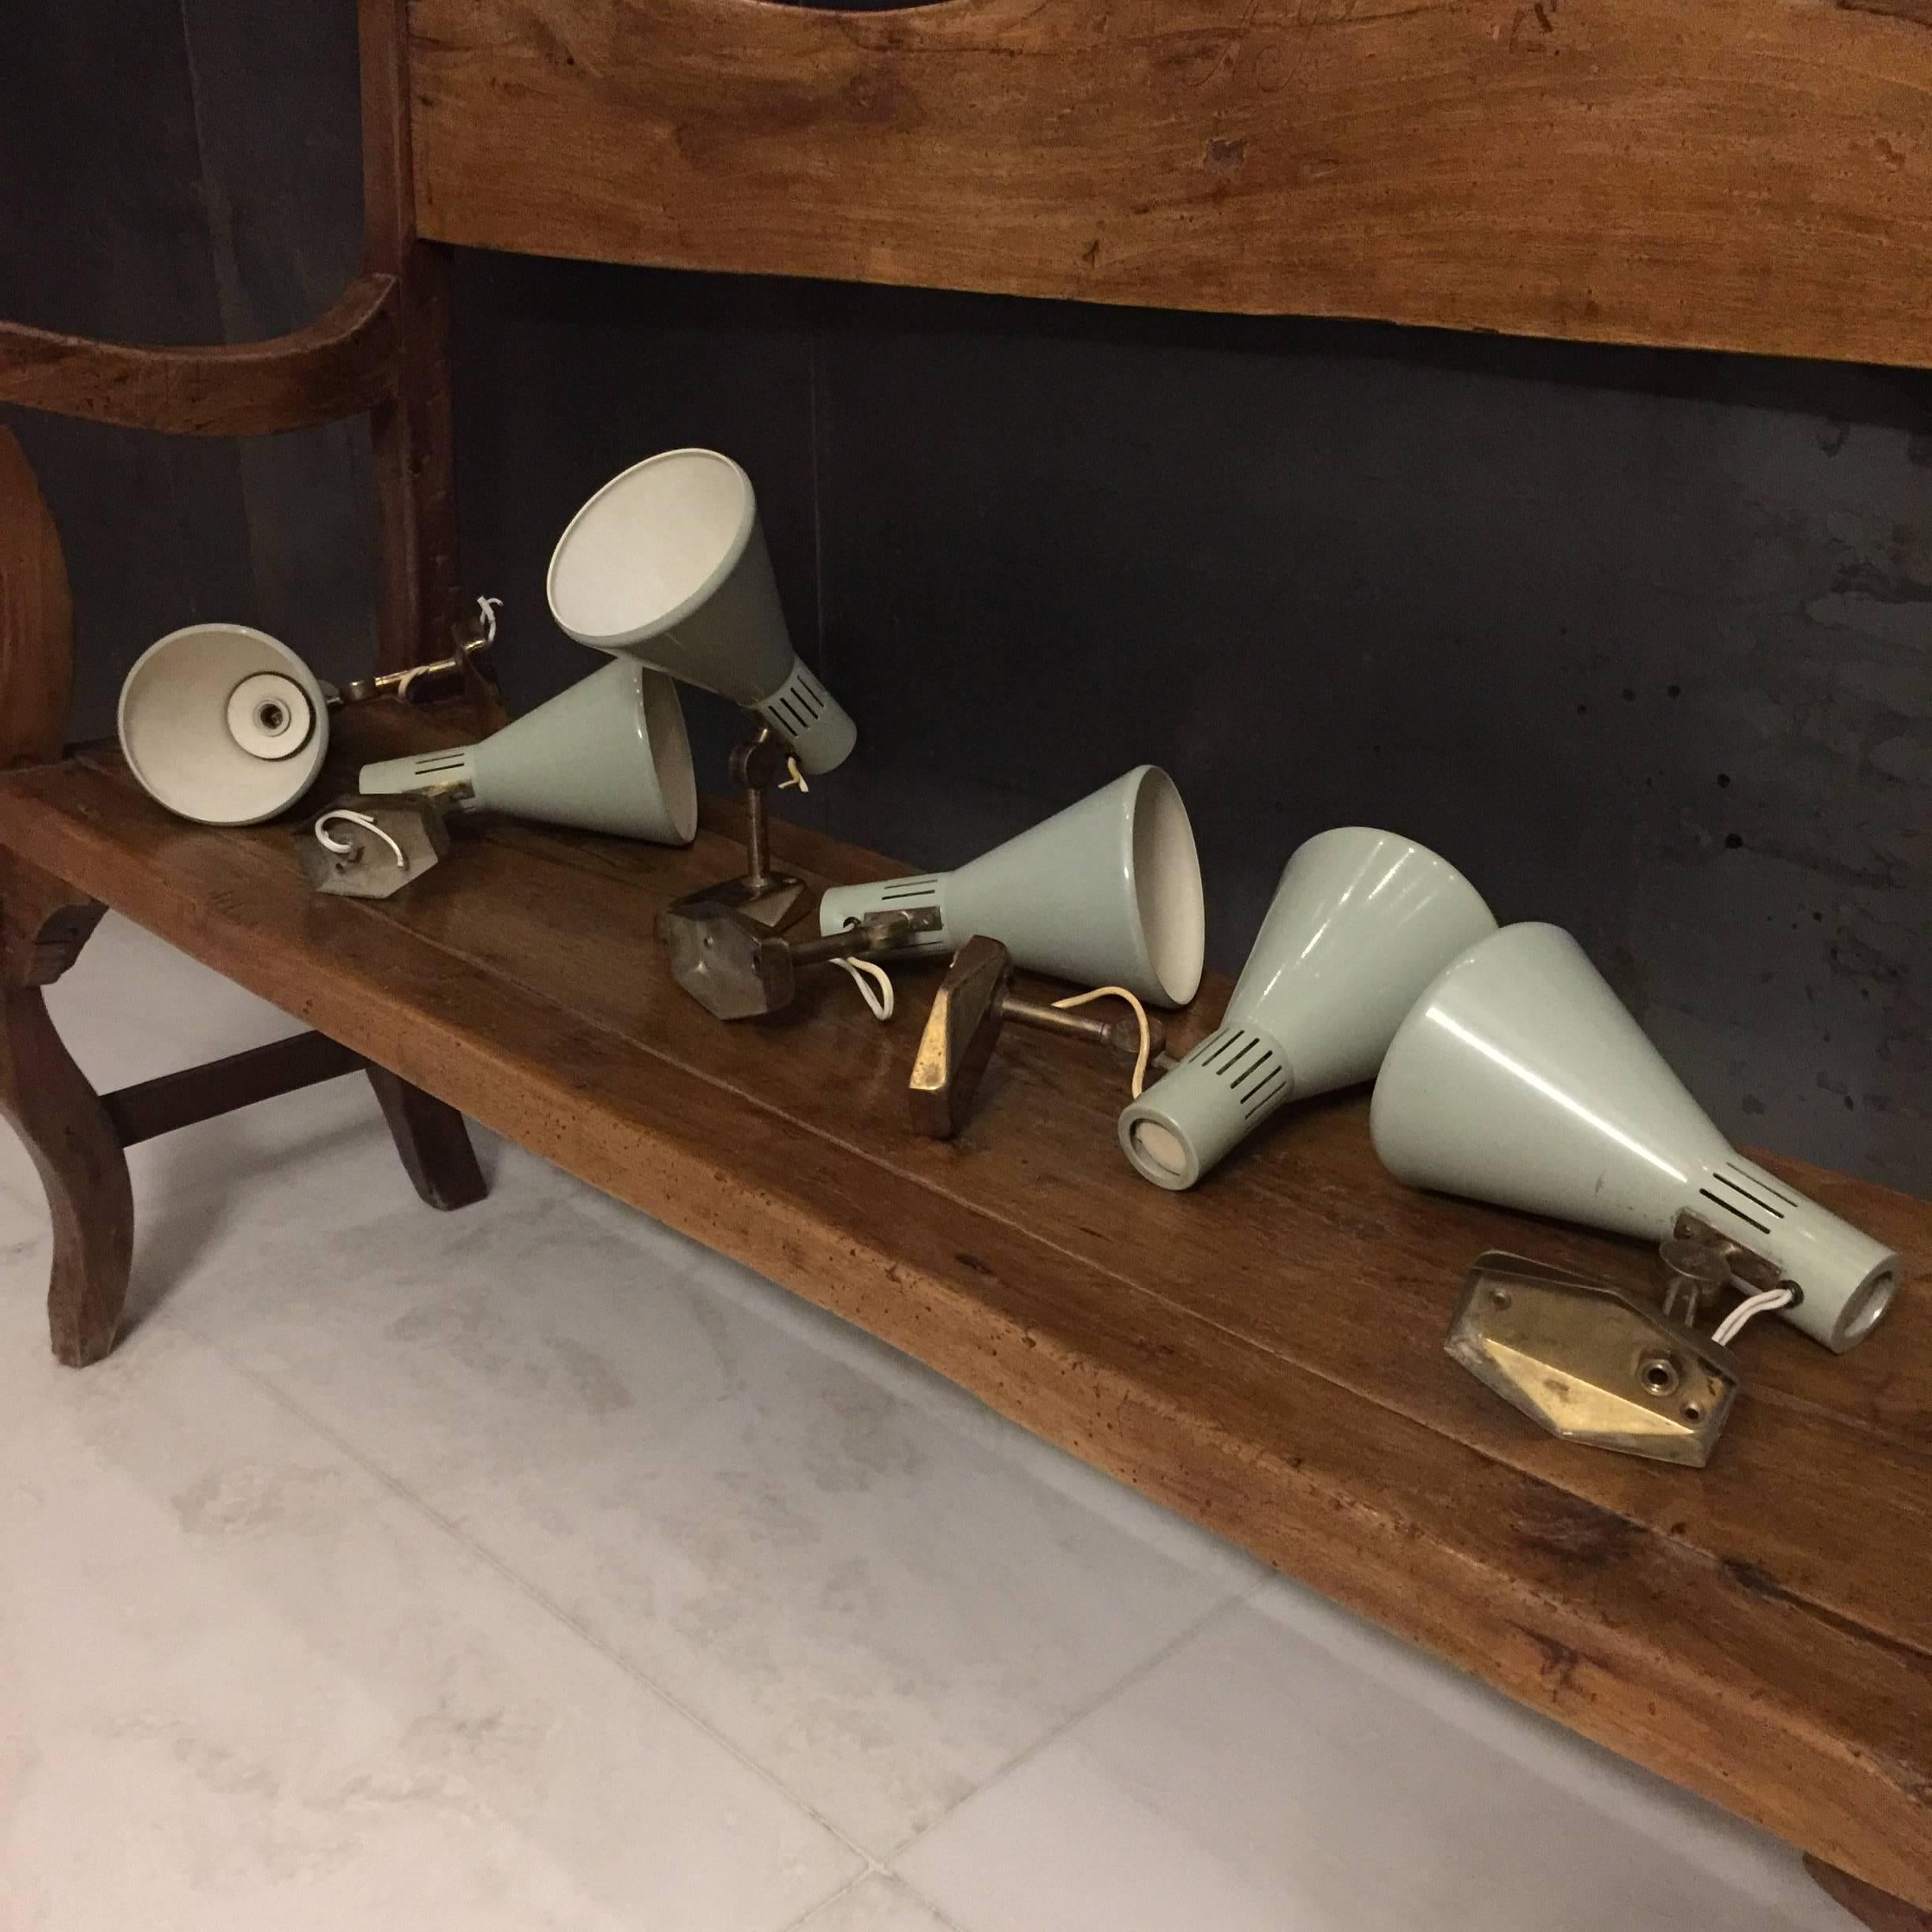 Set of six wall lights, 1950s. Brass and lacquered aluminium. Imprinted Stilnovo patent and original Stilnovo labels.
Measures: Height 19 cm, width 12 cm, depth 19 cm.
Very good vintage conditions. Brass with signs of age and use.